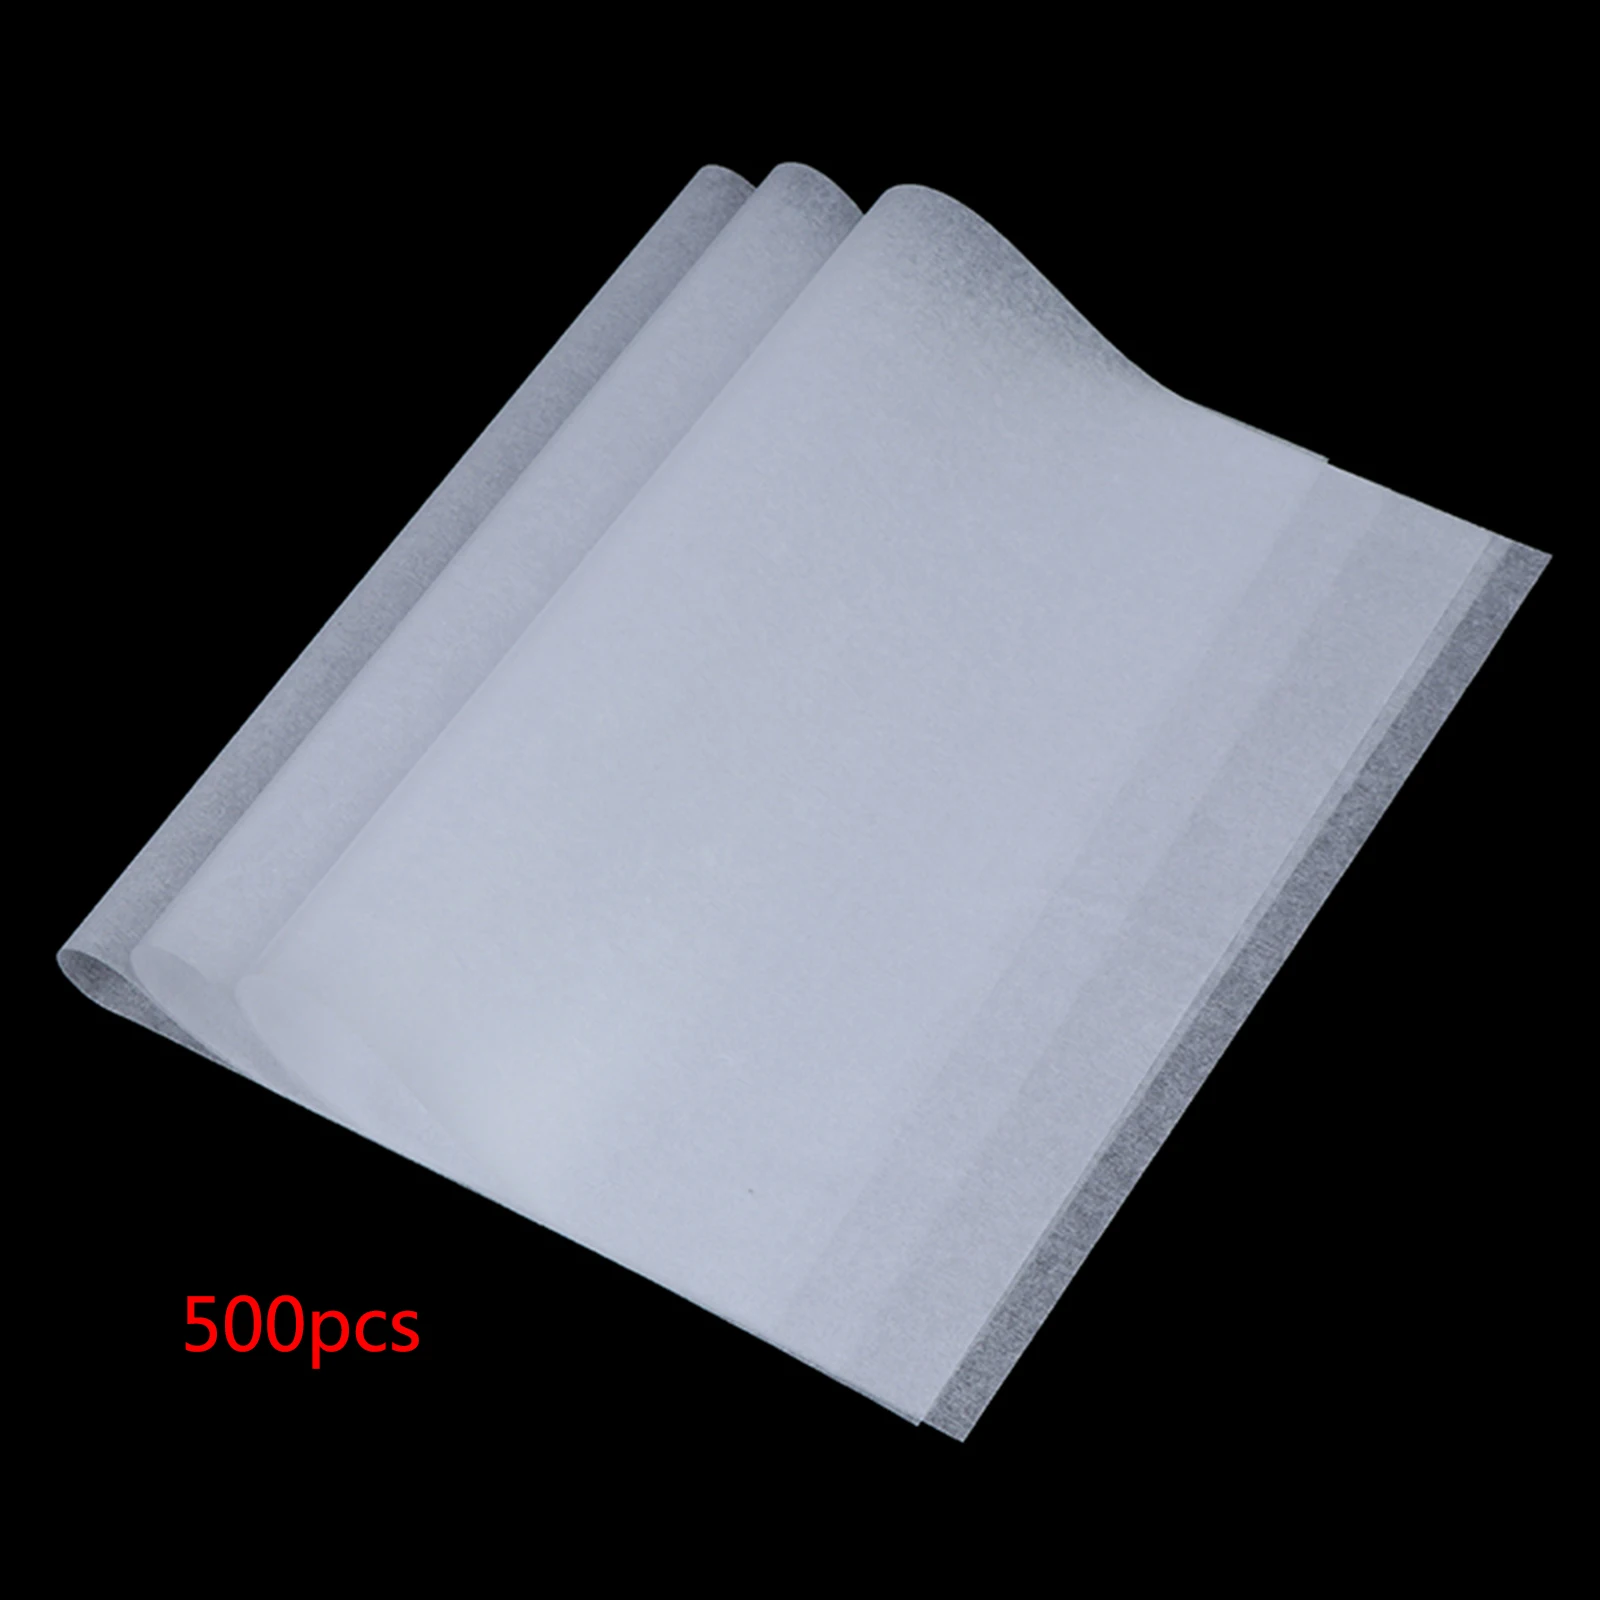 Translucent Clear Paper for Copying Artist’s Tracing Paper Drawing 500pcs A4 Semi-Translucent White Painting Tracing Paper Vellum Paper Sketching Tracing Comic Design 